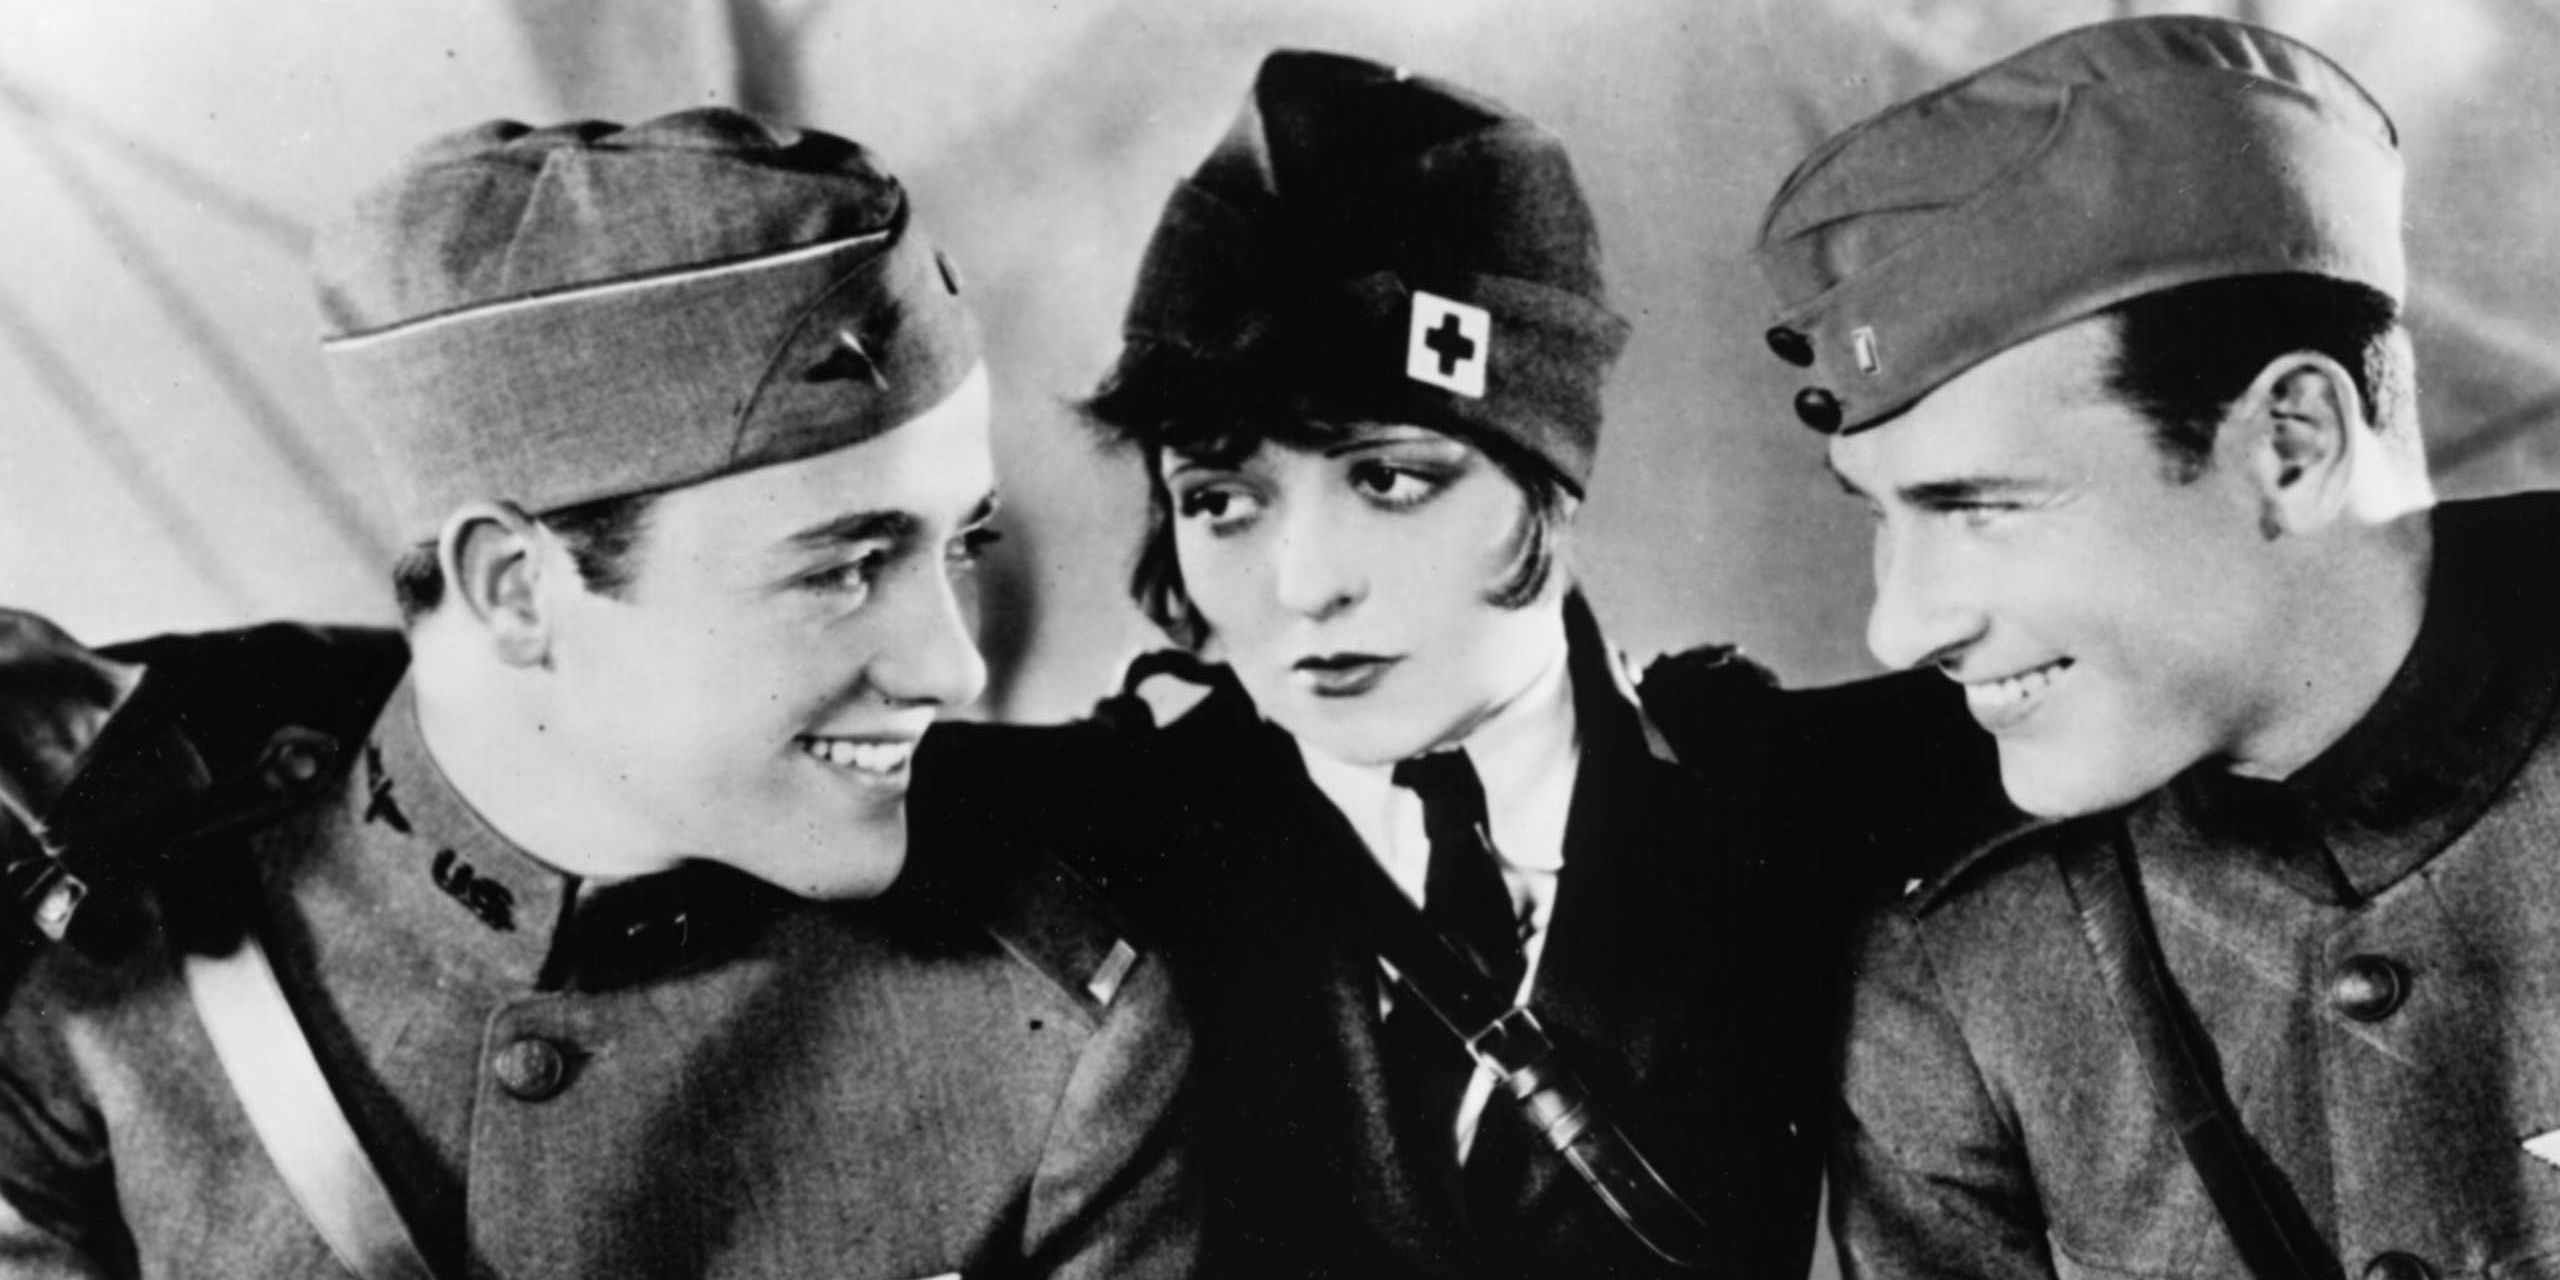 A scene of two men and a military woman from the silent film, Wings